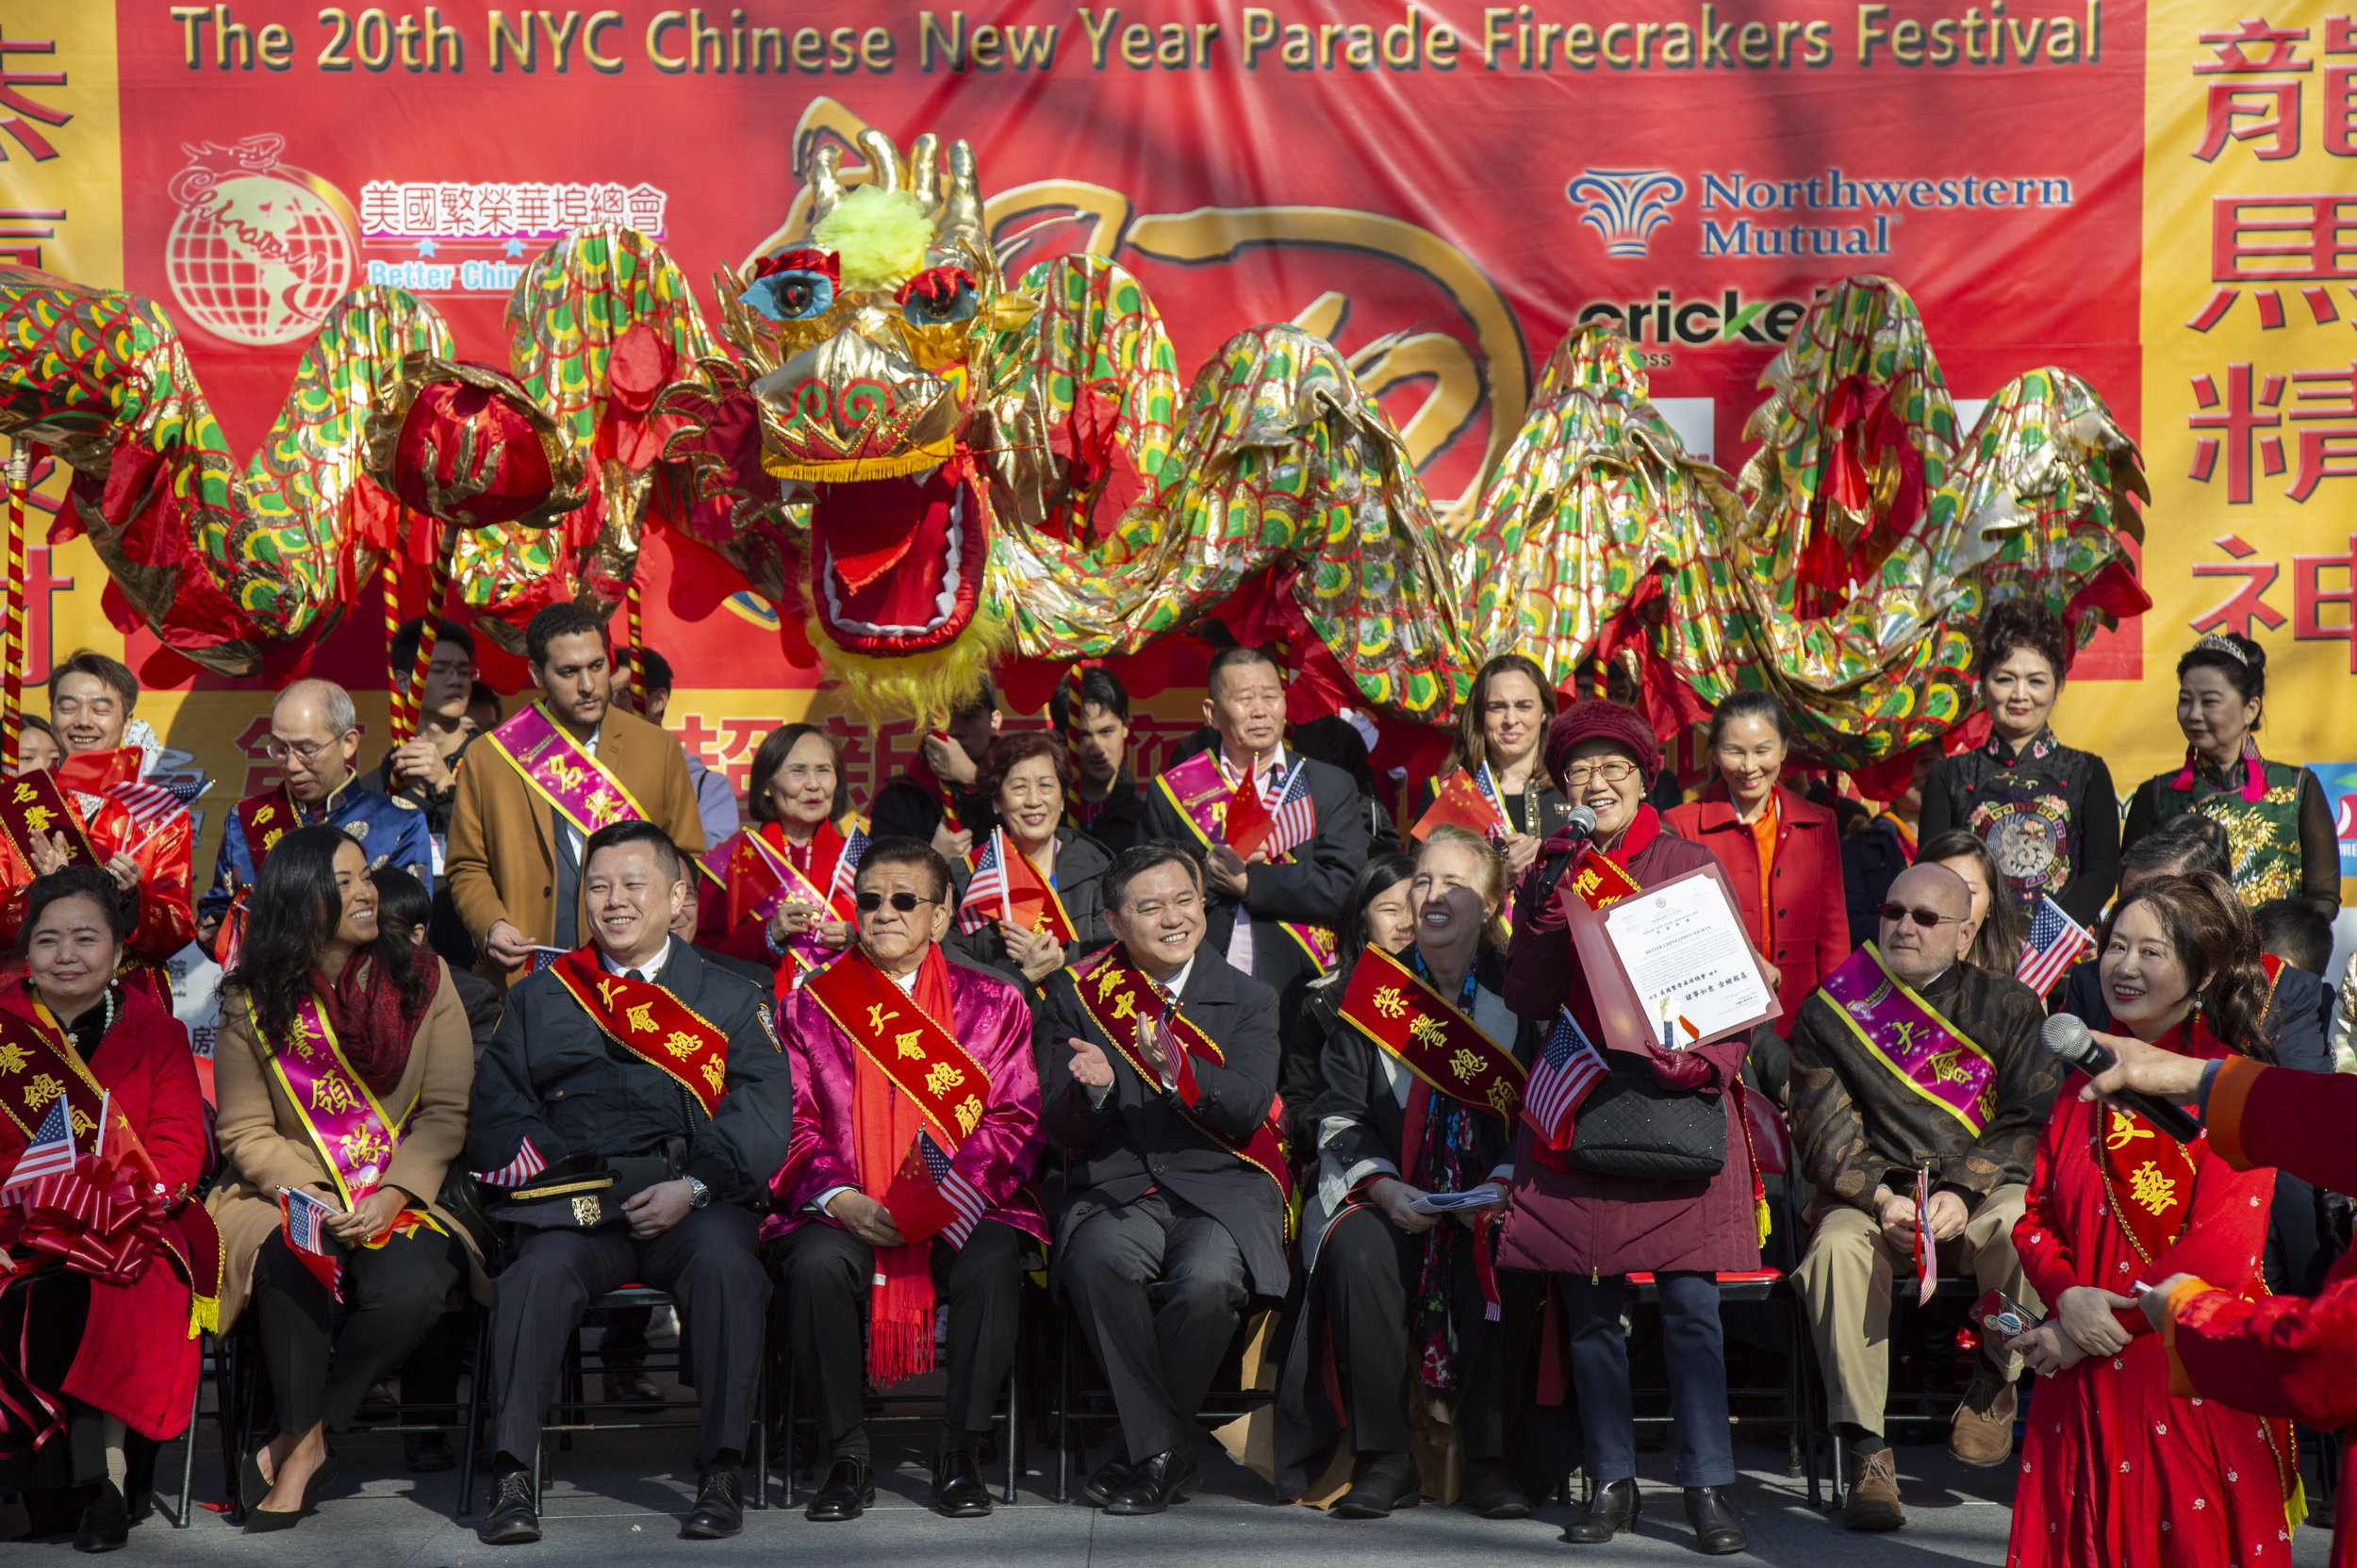 City Council Member Margaret Chin Speaks During Chinese New Year Firecracker Festival 